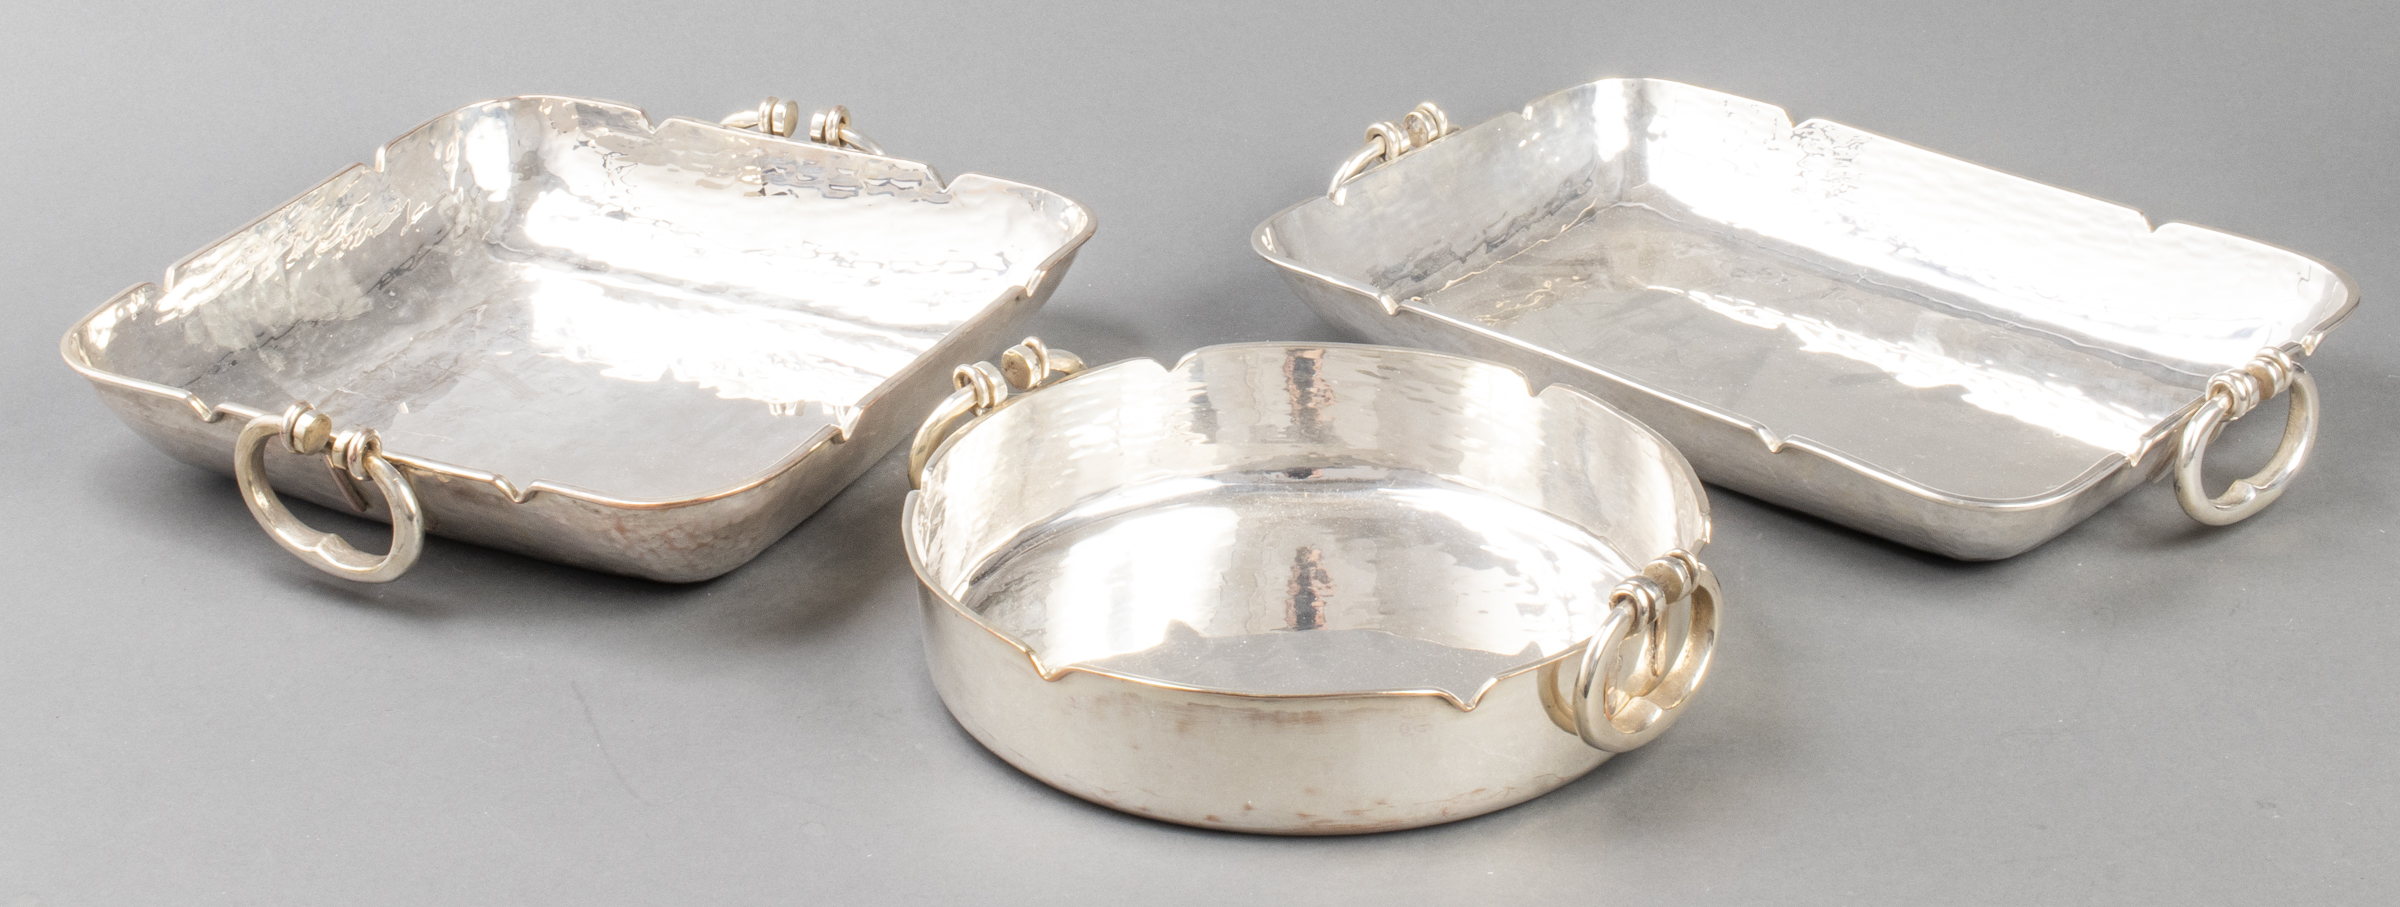 SILVERPLATE SERVING DISHES WITH 3c3e65